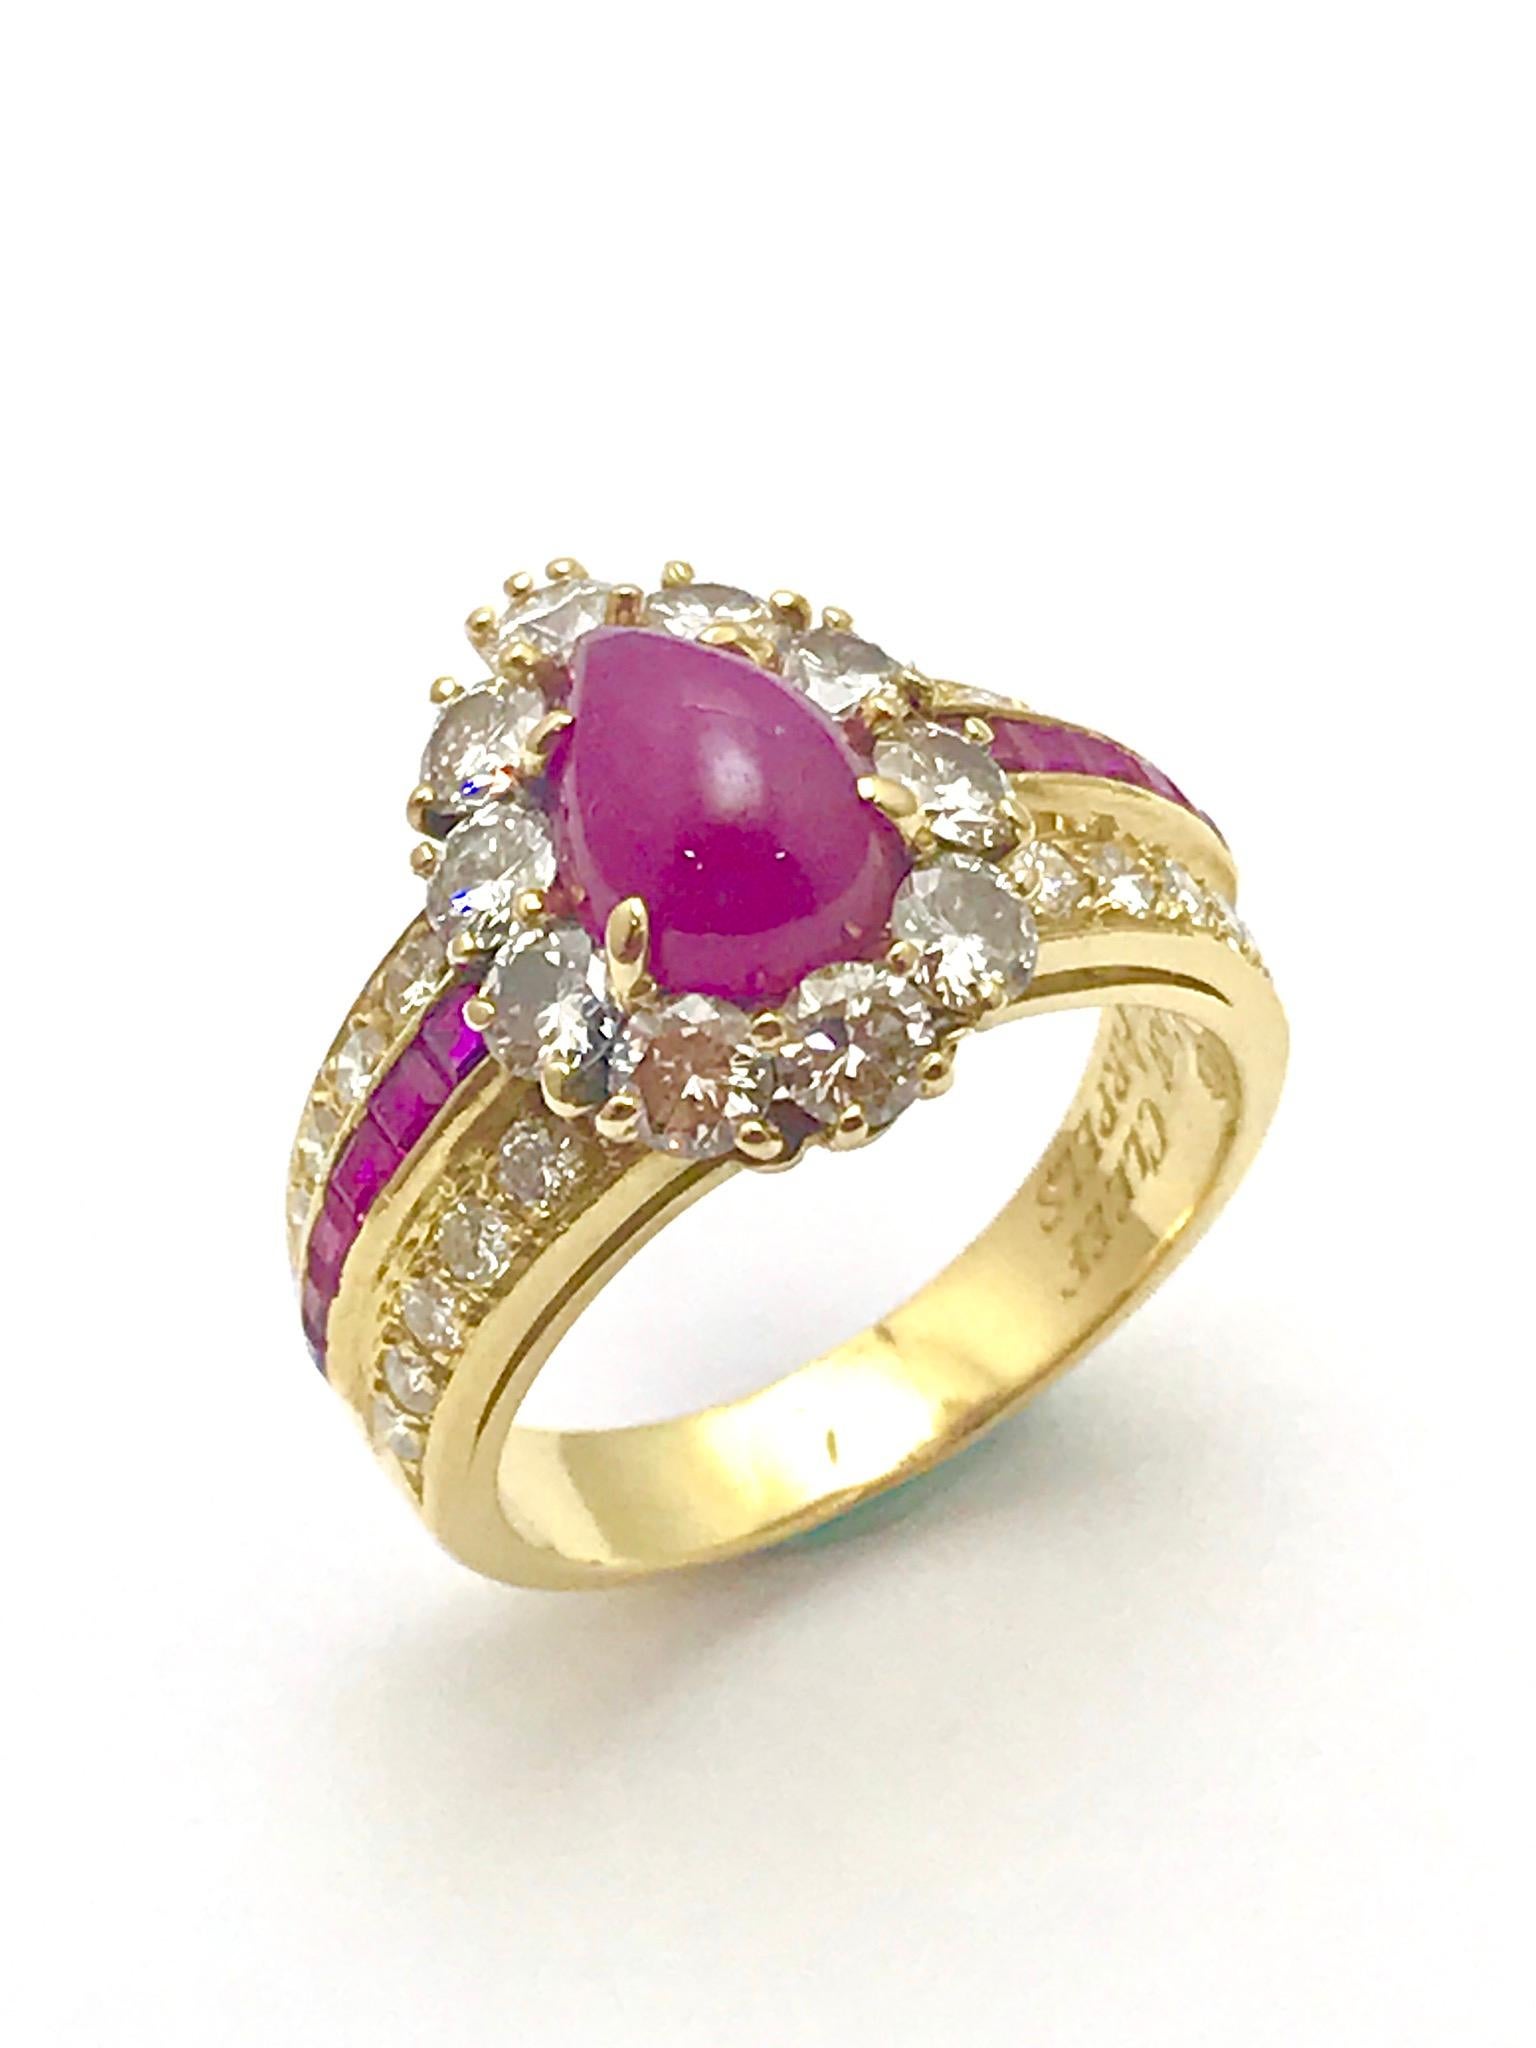 A Van Cleef & Arpels pear shape cabochon ruby and diamond 18 karat yellow gold ring.  The cabochon ruby is prong set and surrounded by ten round brilliant diamonds, atop a three row half shank containing two rows of diamonds and a row of rubies. 